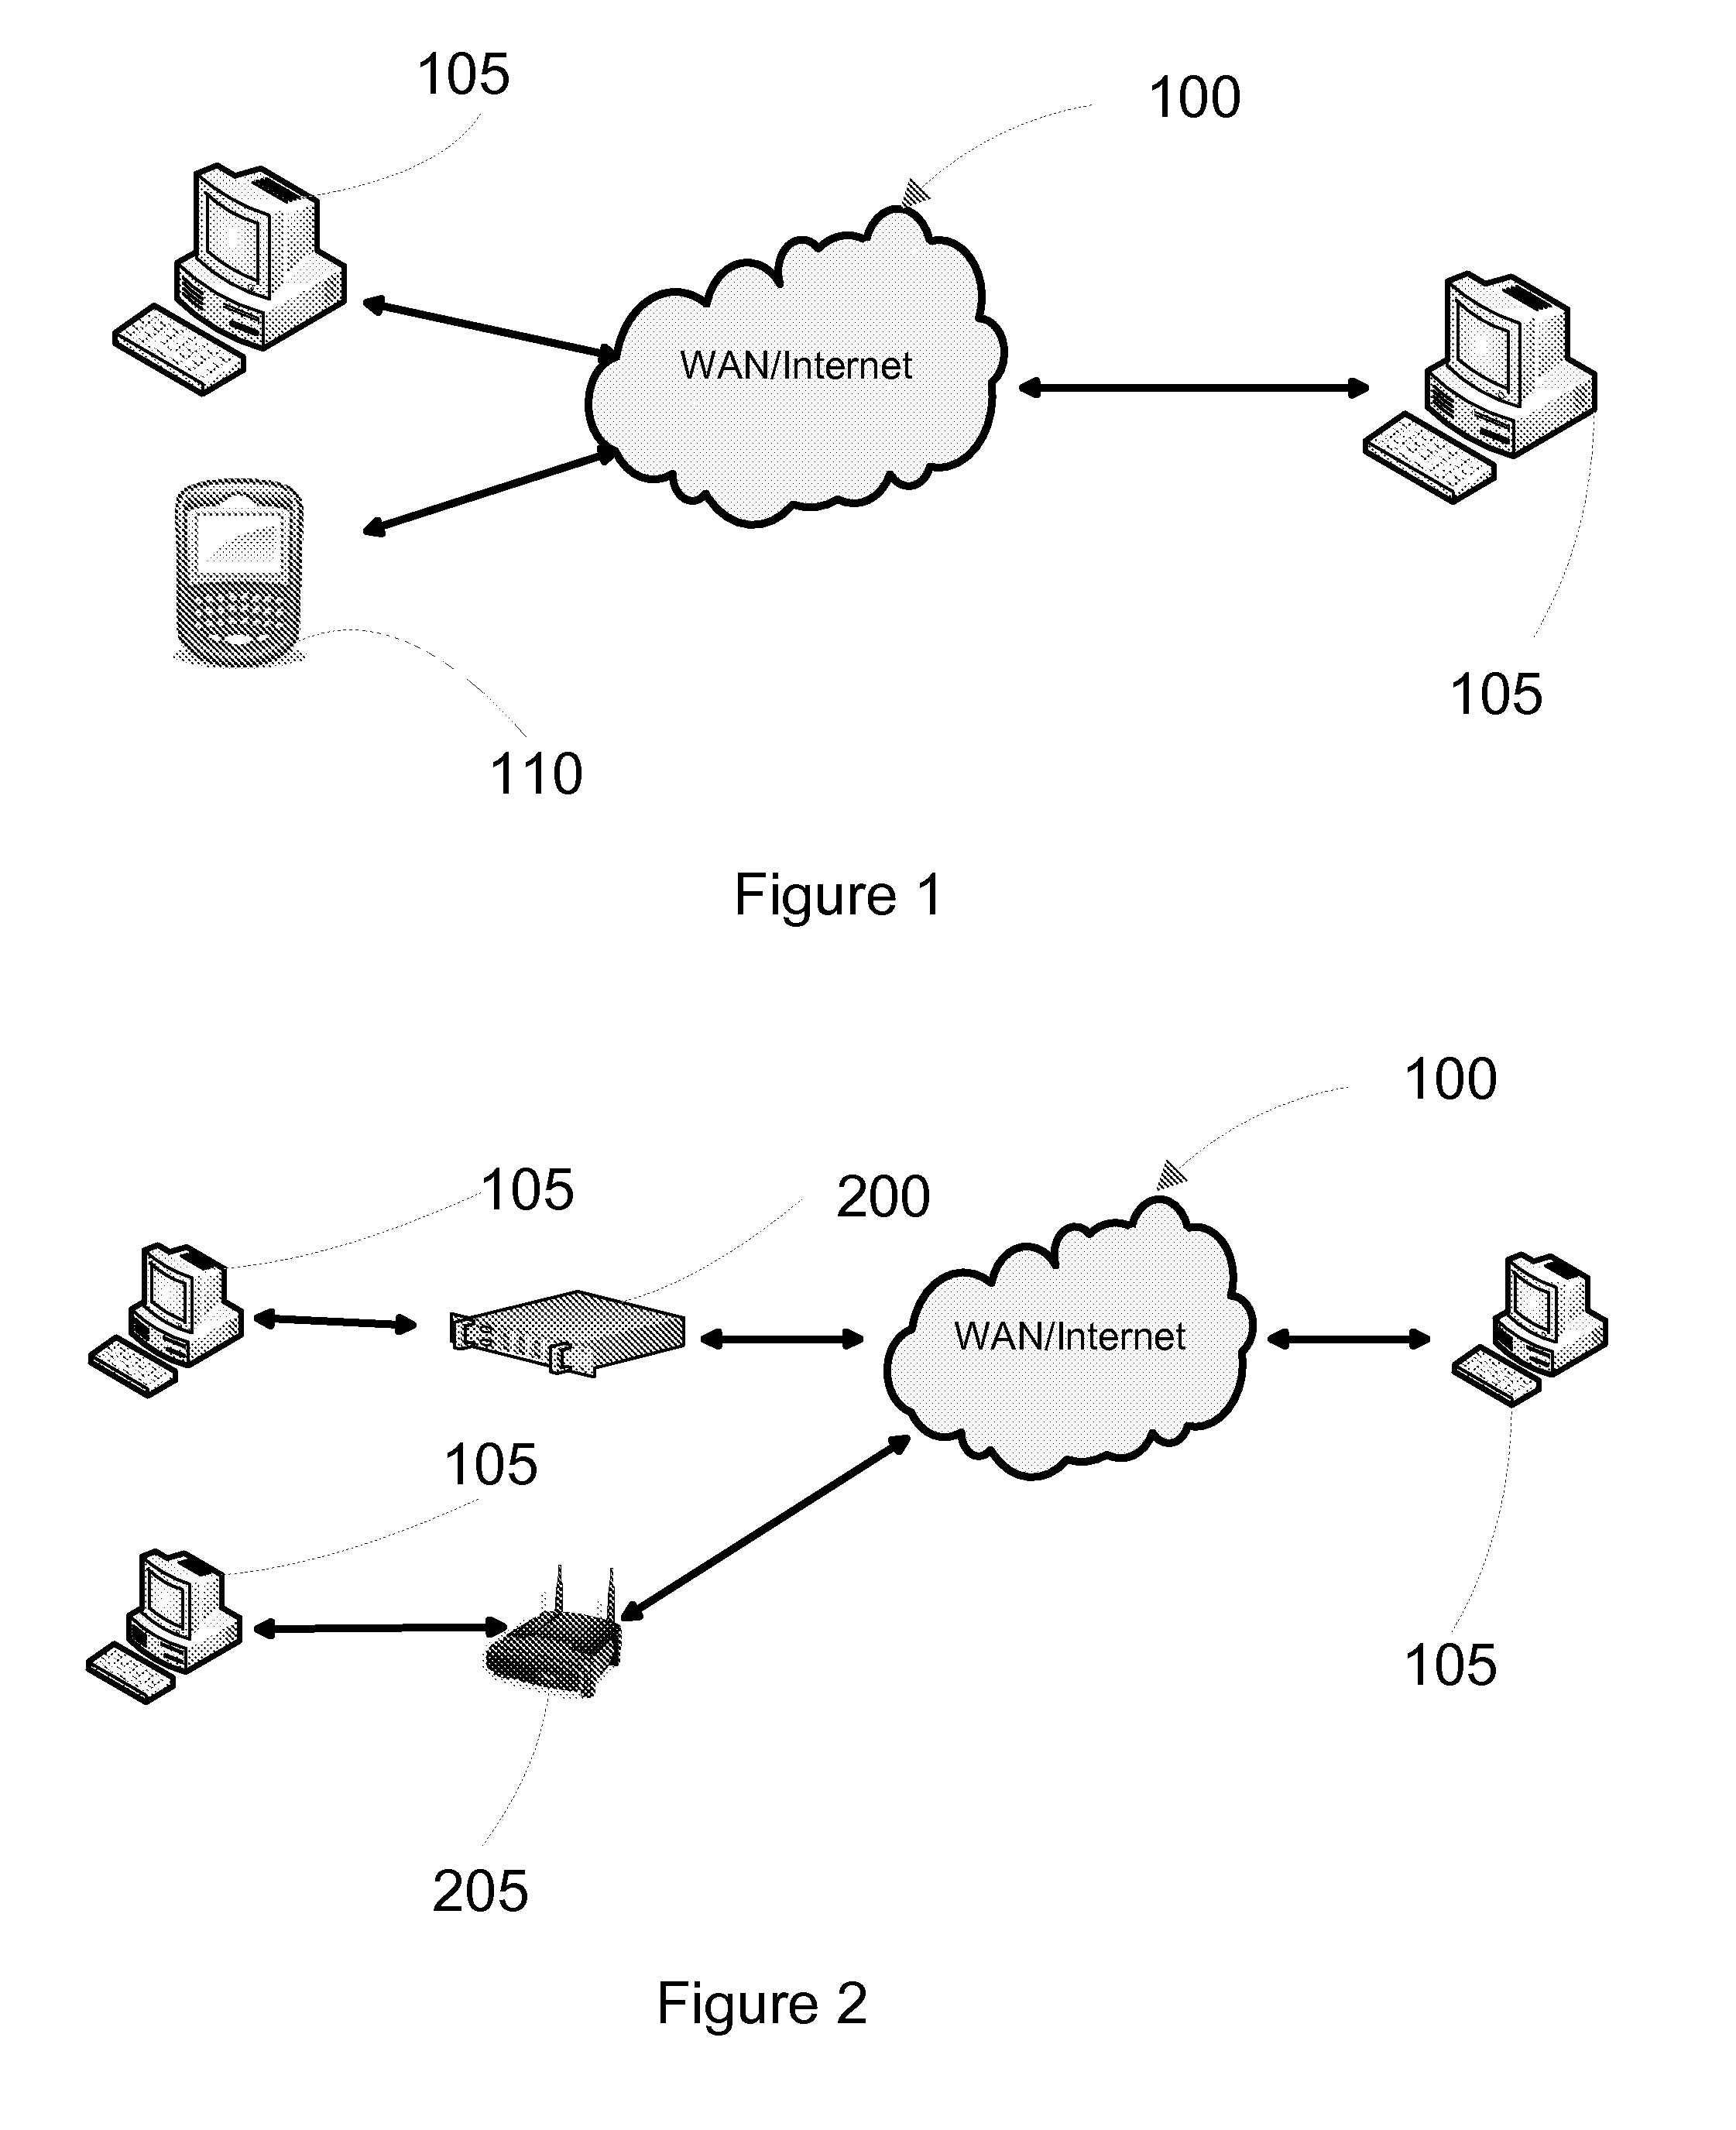 Method for detecting TCP packet losses and expediting packet retransmission